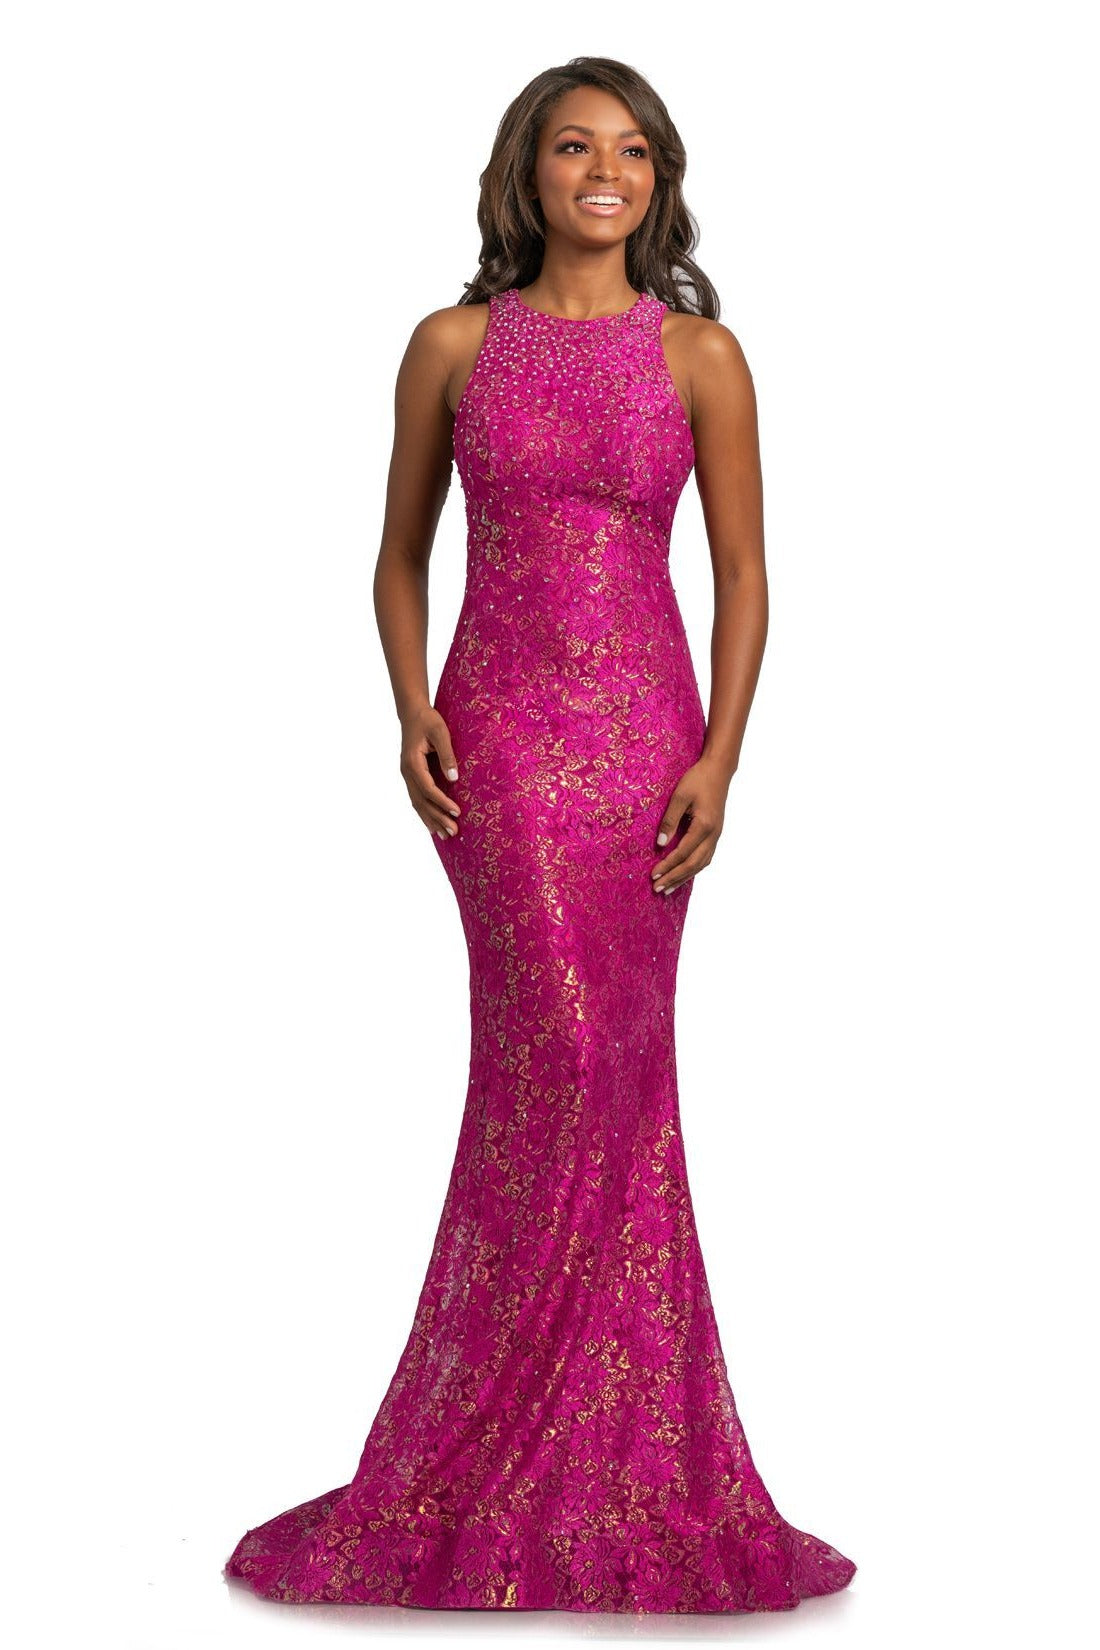 Johnathan Kayne 2036 is a long lace Prom Dress, Pageant Gown & Formal Evening Wear. This Long Fitted Gown Features Iridescent Metallic Shimmer Lace along the entire dress. Featuring a high neckline and beautiful Open Cutout back. Embellished with scattered crystals along the bodice. Subtle Fit & Flare Silhouette with a stage worthy sweeping train!